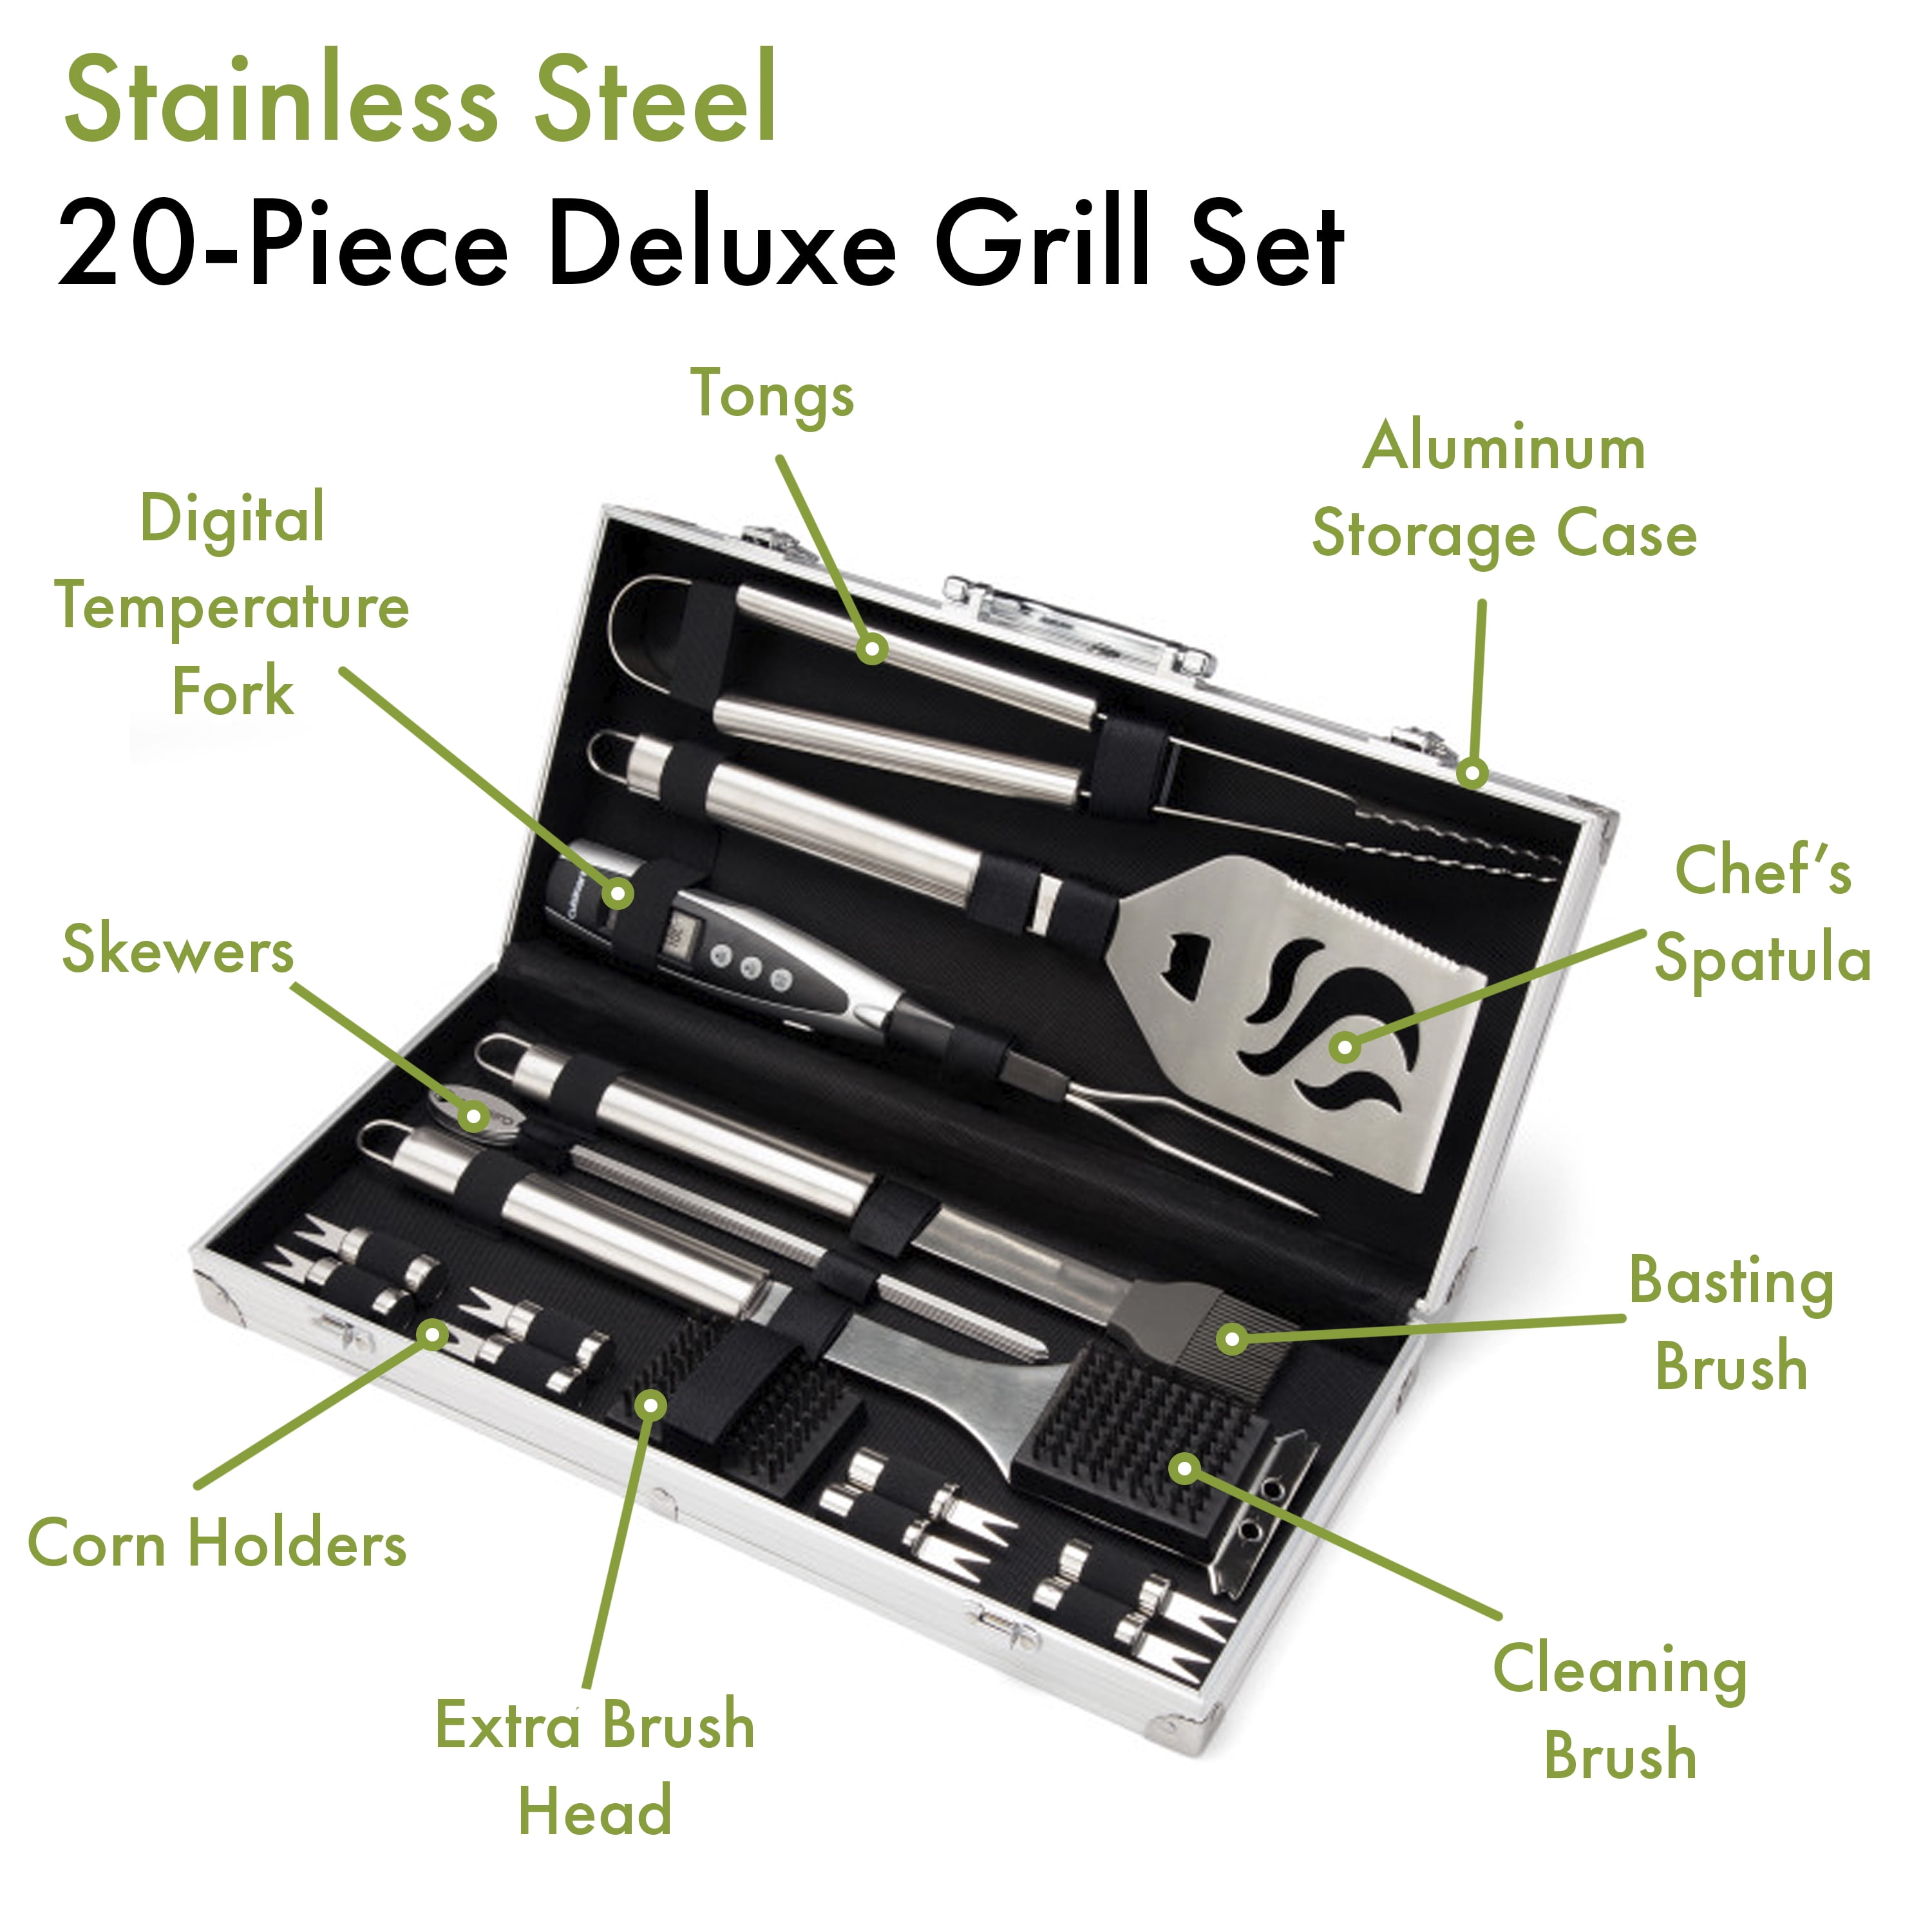 Deluxe Grill Set 24 pcs – Stainless Steel BBQ Tool Set for